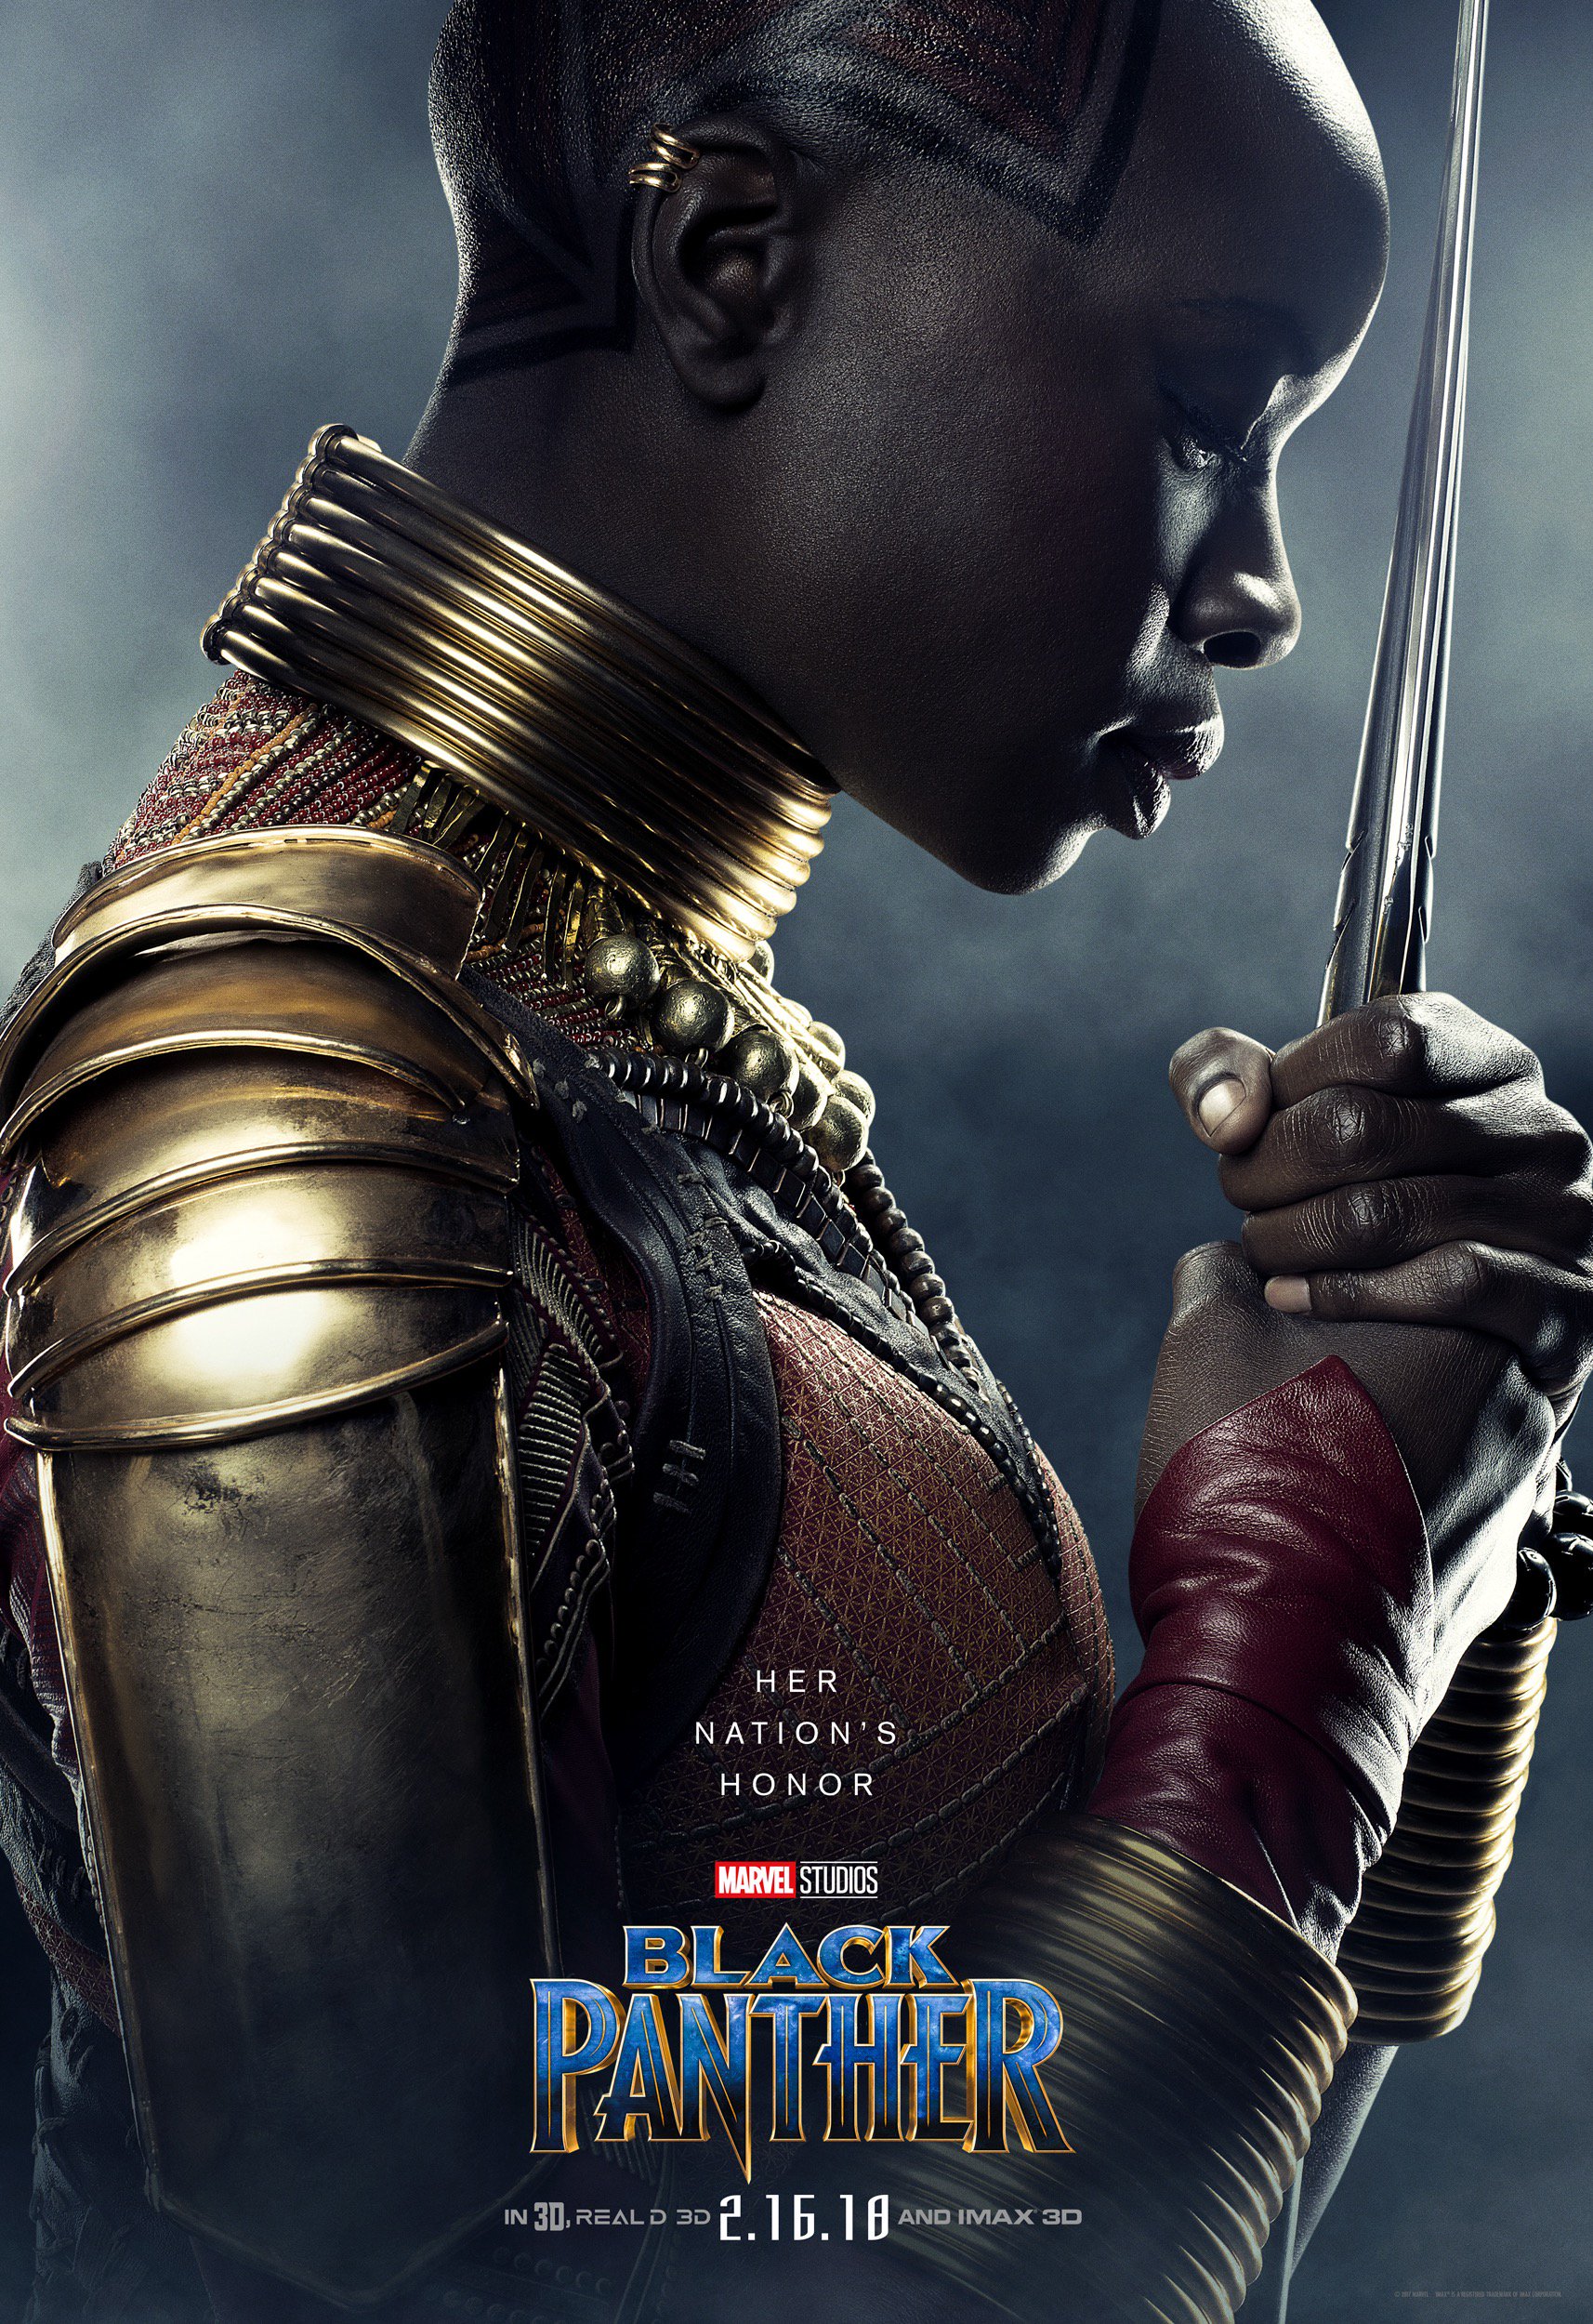 Black Panther Character Posters Spotlight The Various